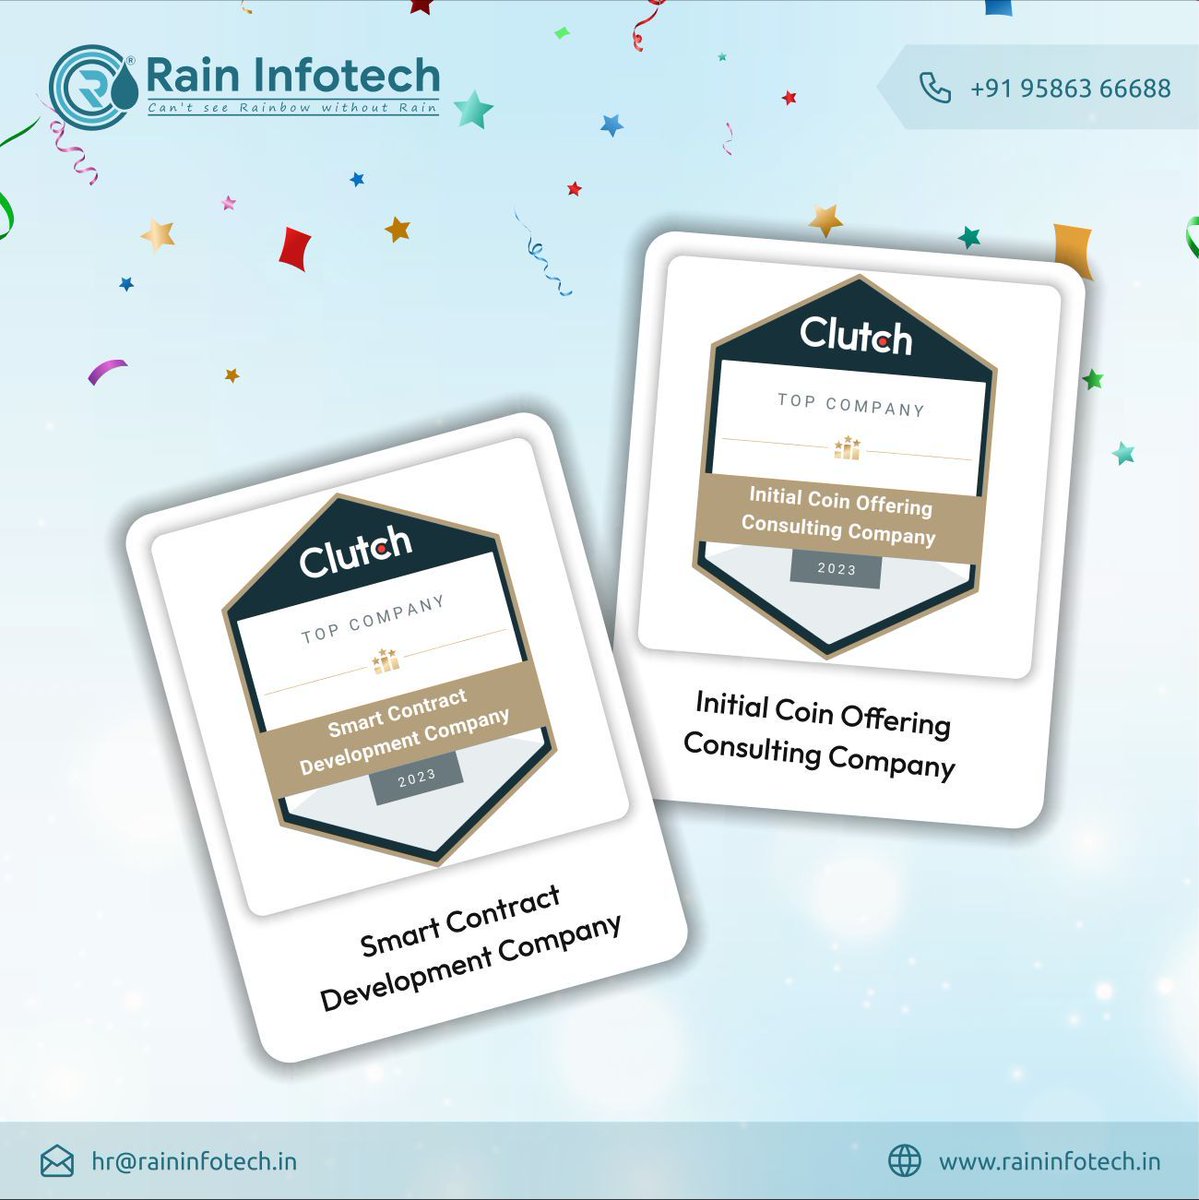 We're thrilled to share the exciting news 🤩 - Rain Infotech has been named a Clutch Champion in not just one category but we have awarded in two.🎊 First one is Top Initial Coin Offering Company-2023 & Top Smart Contract Development Company-2023. 
#ClutchChampion #raininfotech